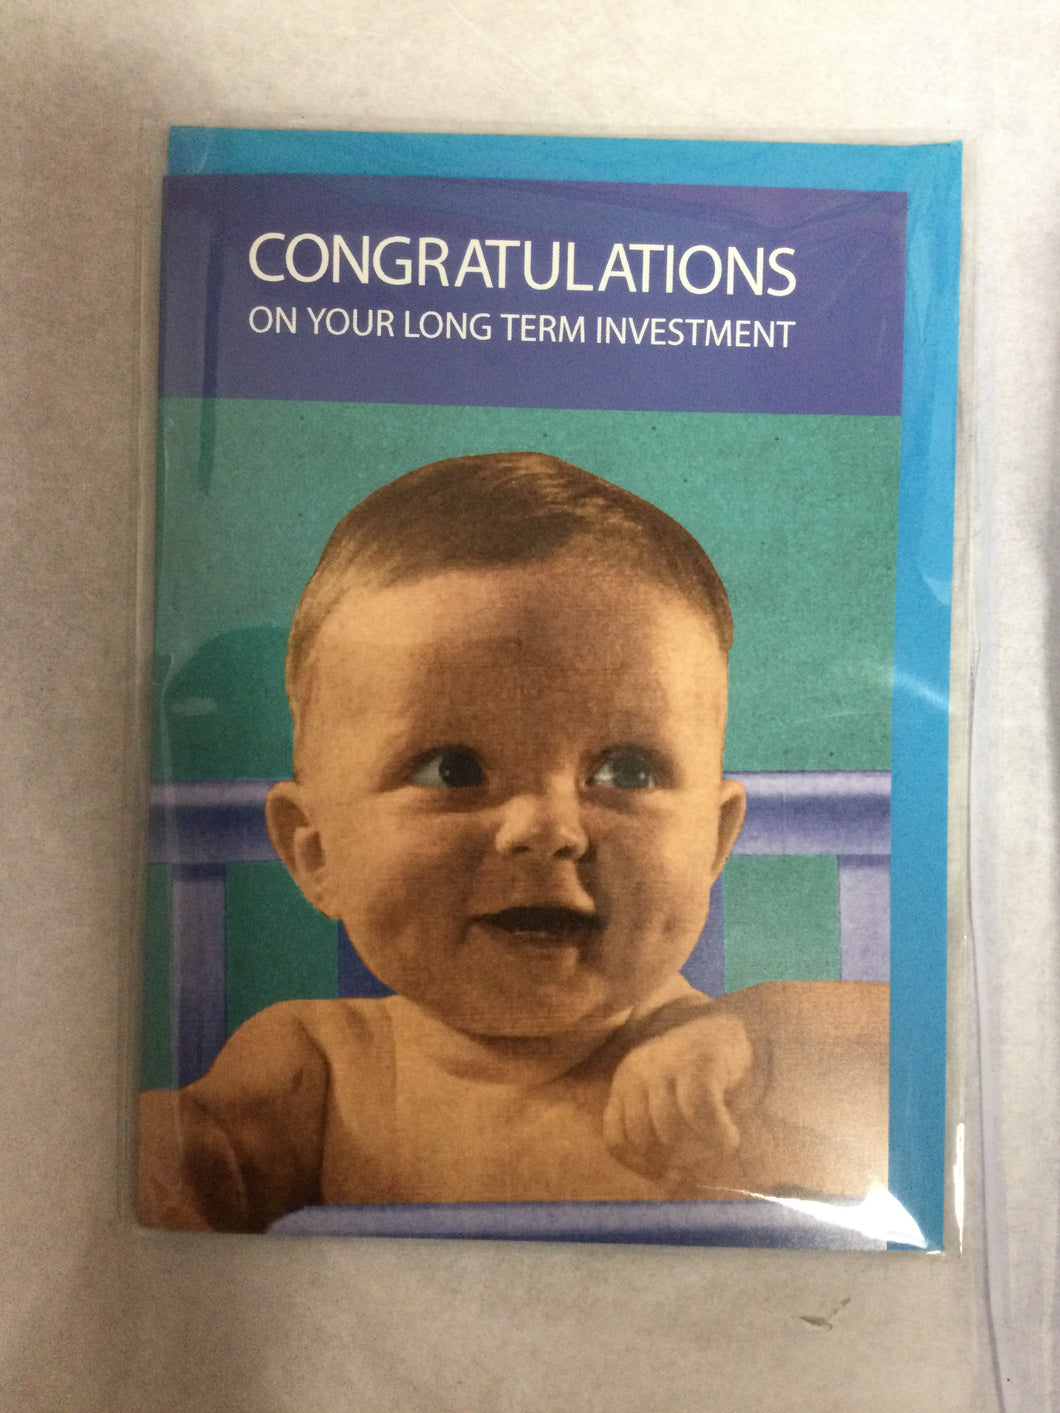 Card, Congratulations on Long Term Investment, Blue